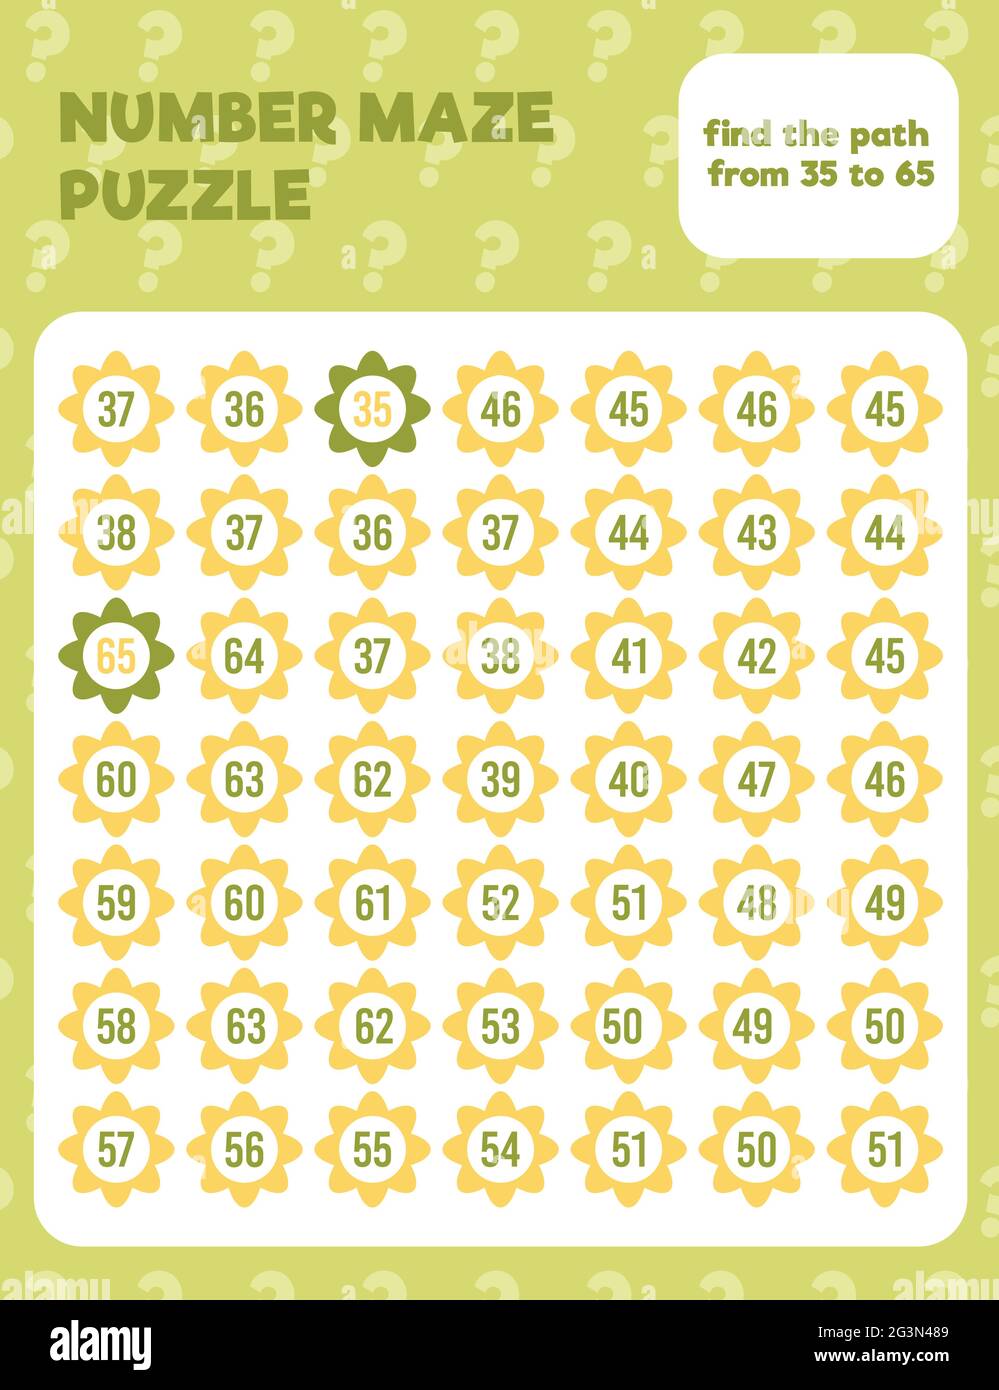 Math number maze puzzle. Prinatble math worksheet page. Easy colorful math worksheet practice for kids in preschool, elementary and middle school. Stock Vector